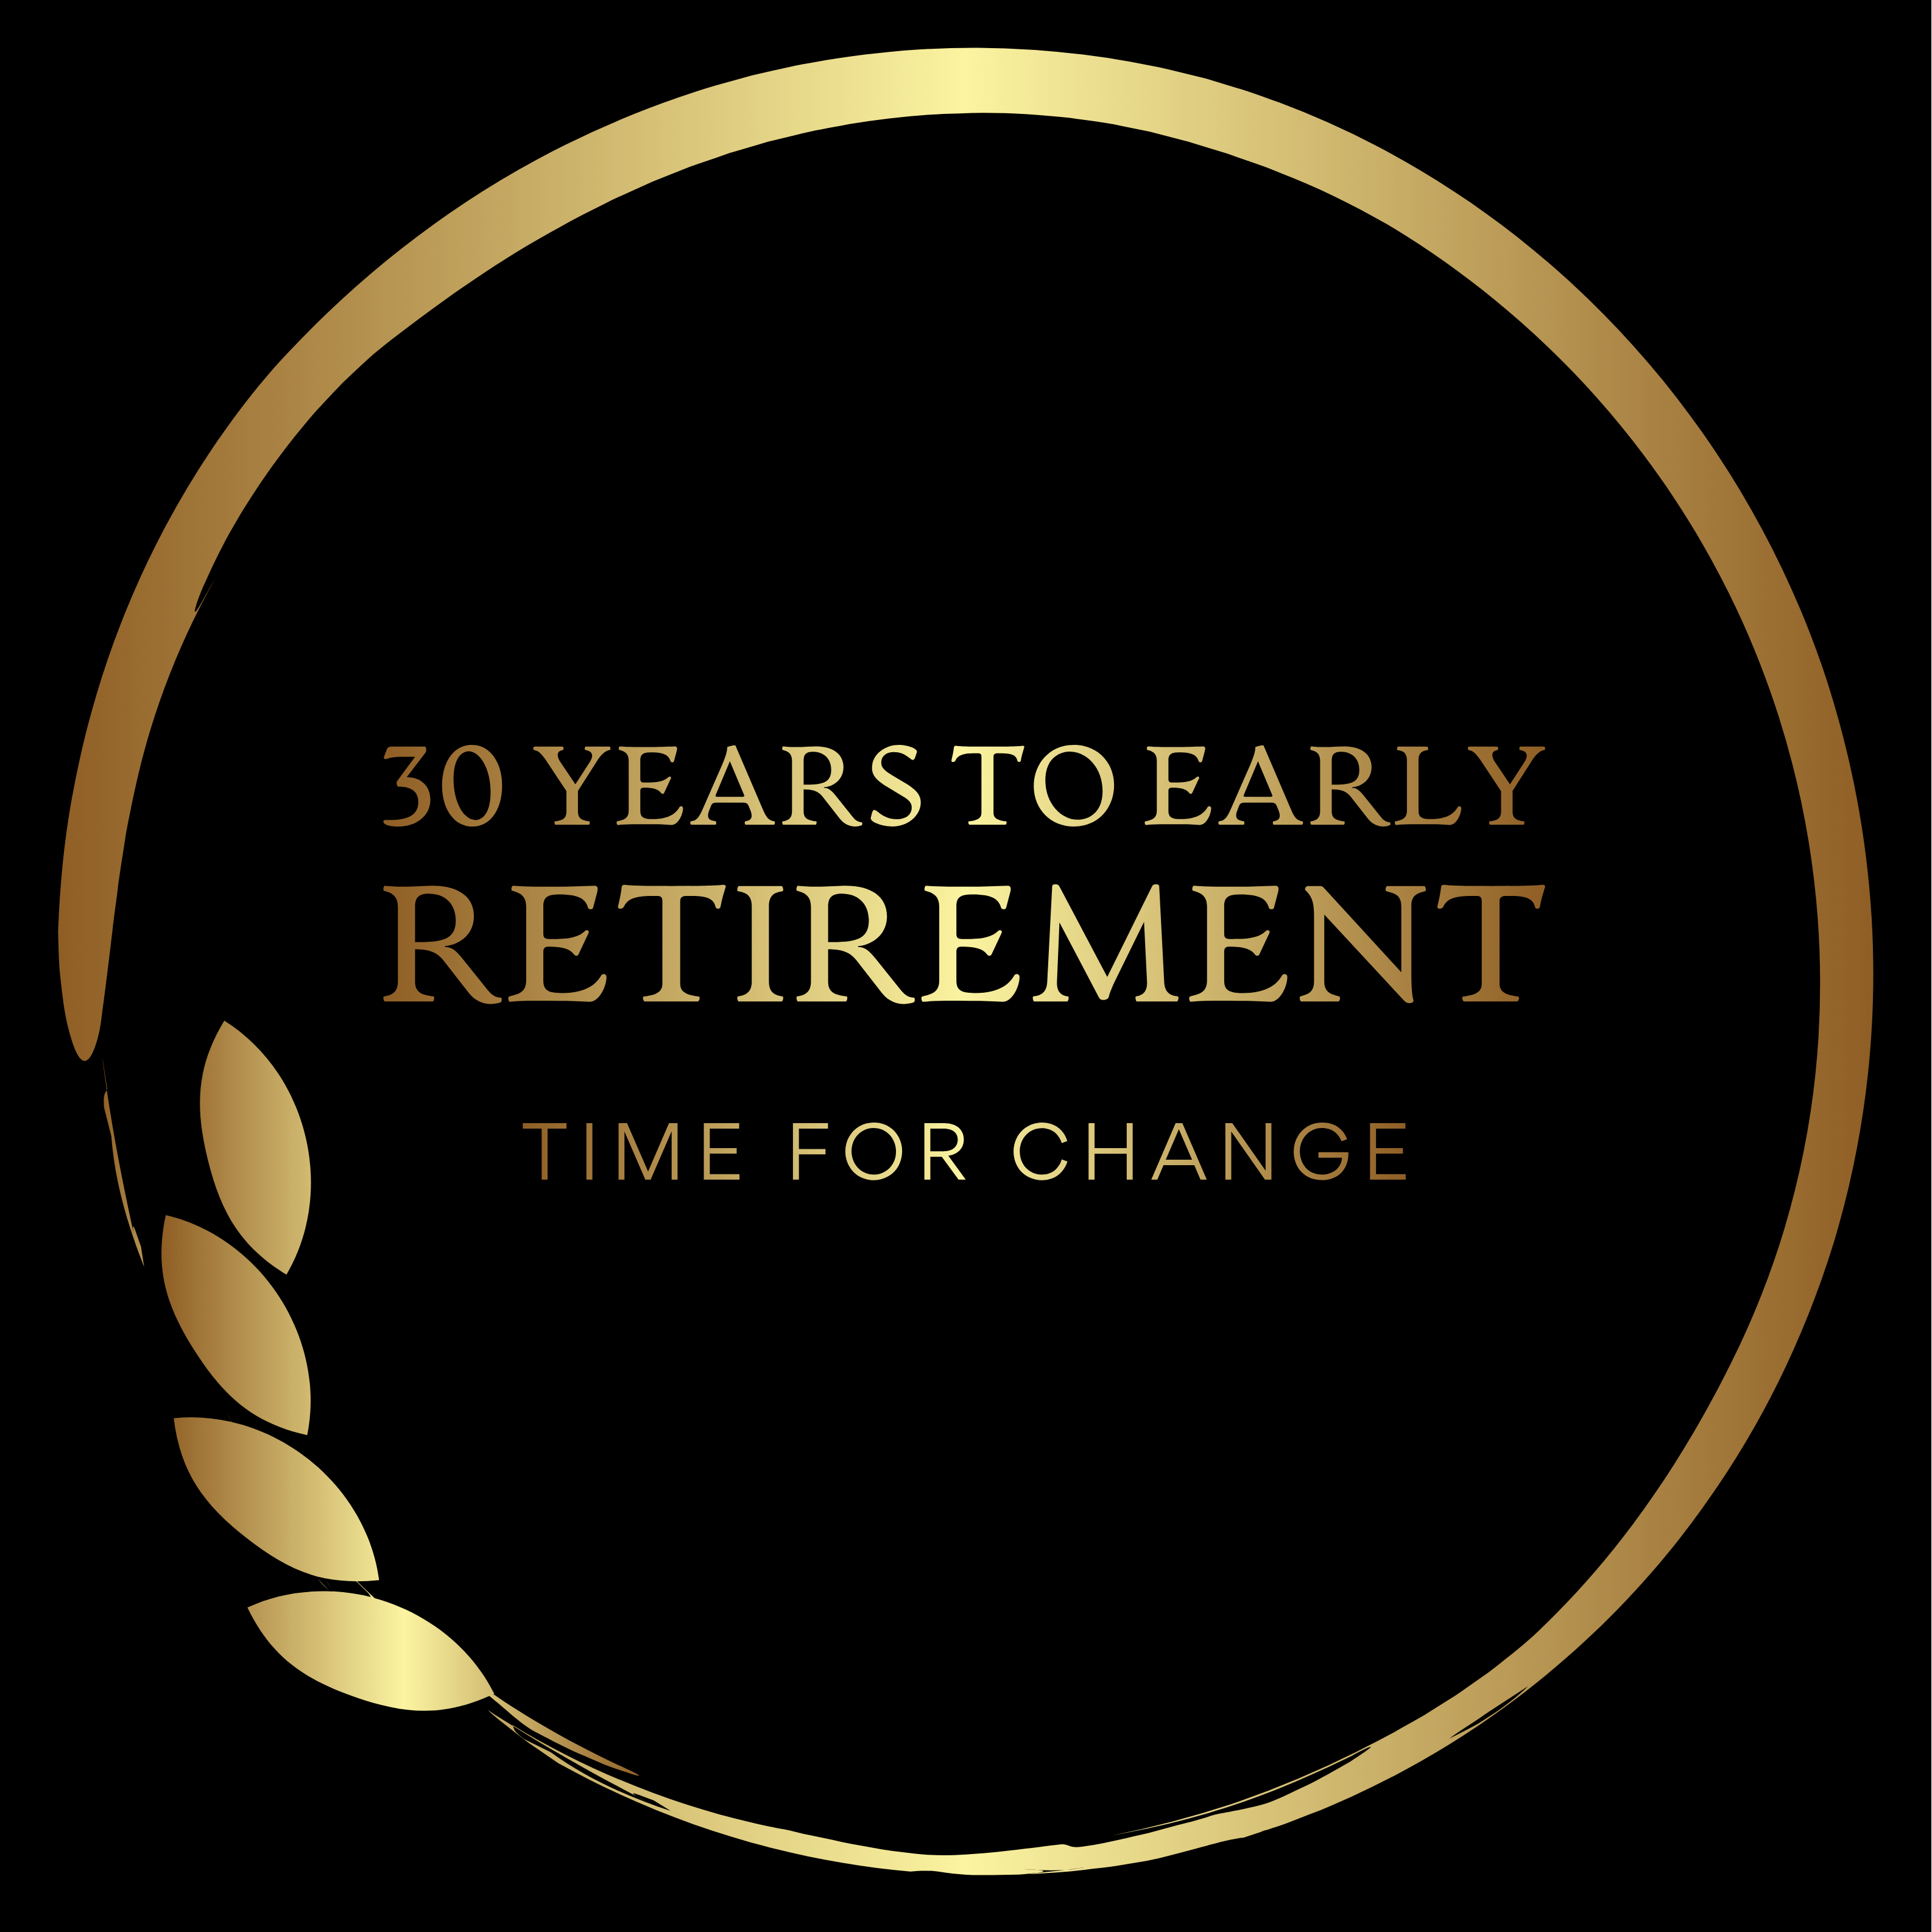 30 Years to Early Retirement